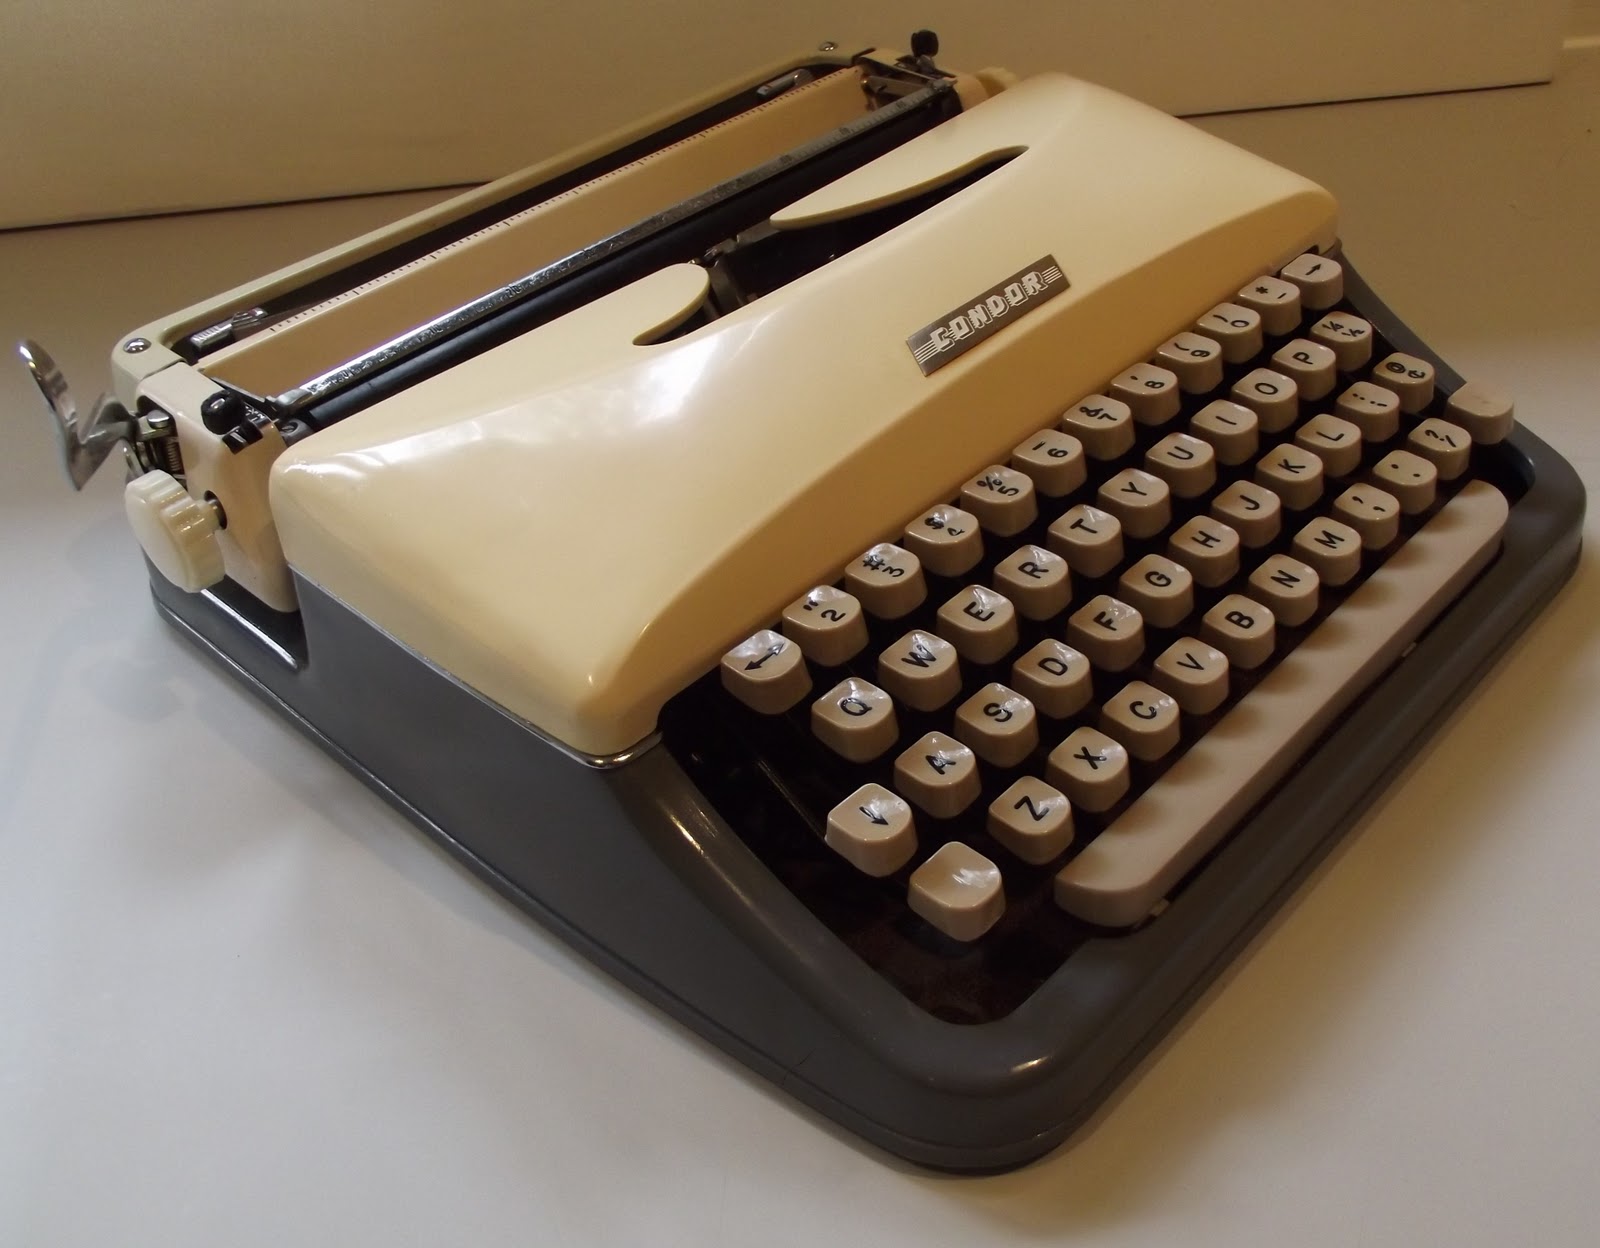 oz.Typewriter: The Condor Has Landed! My Mysterious New Typewriter